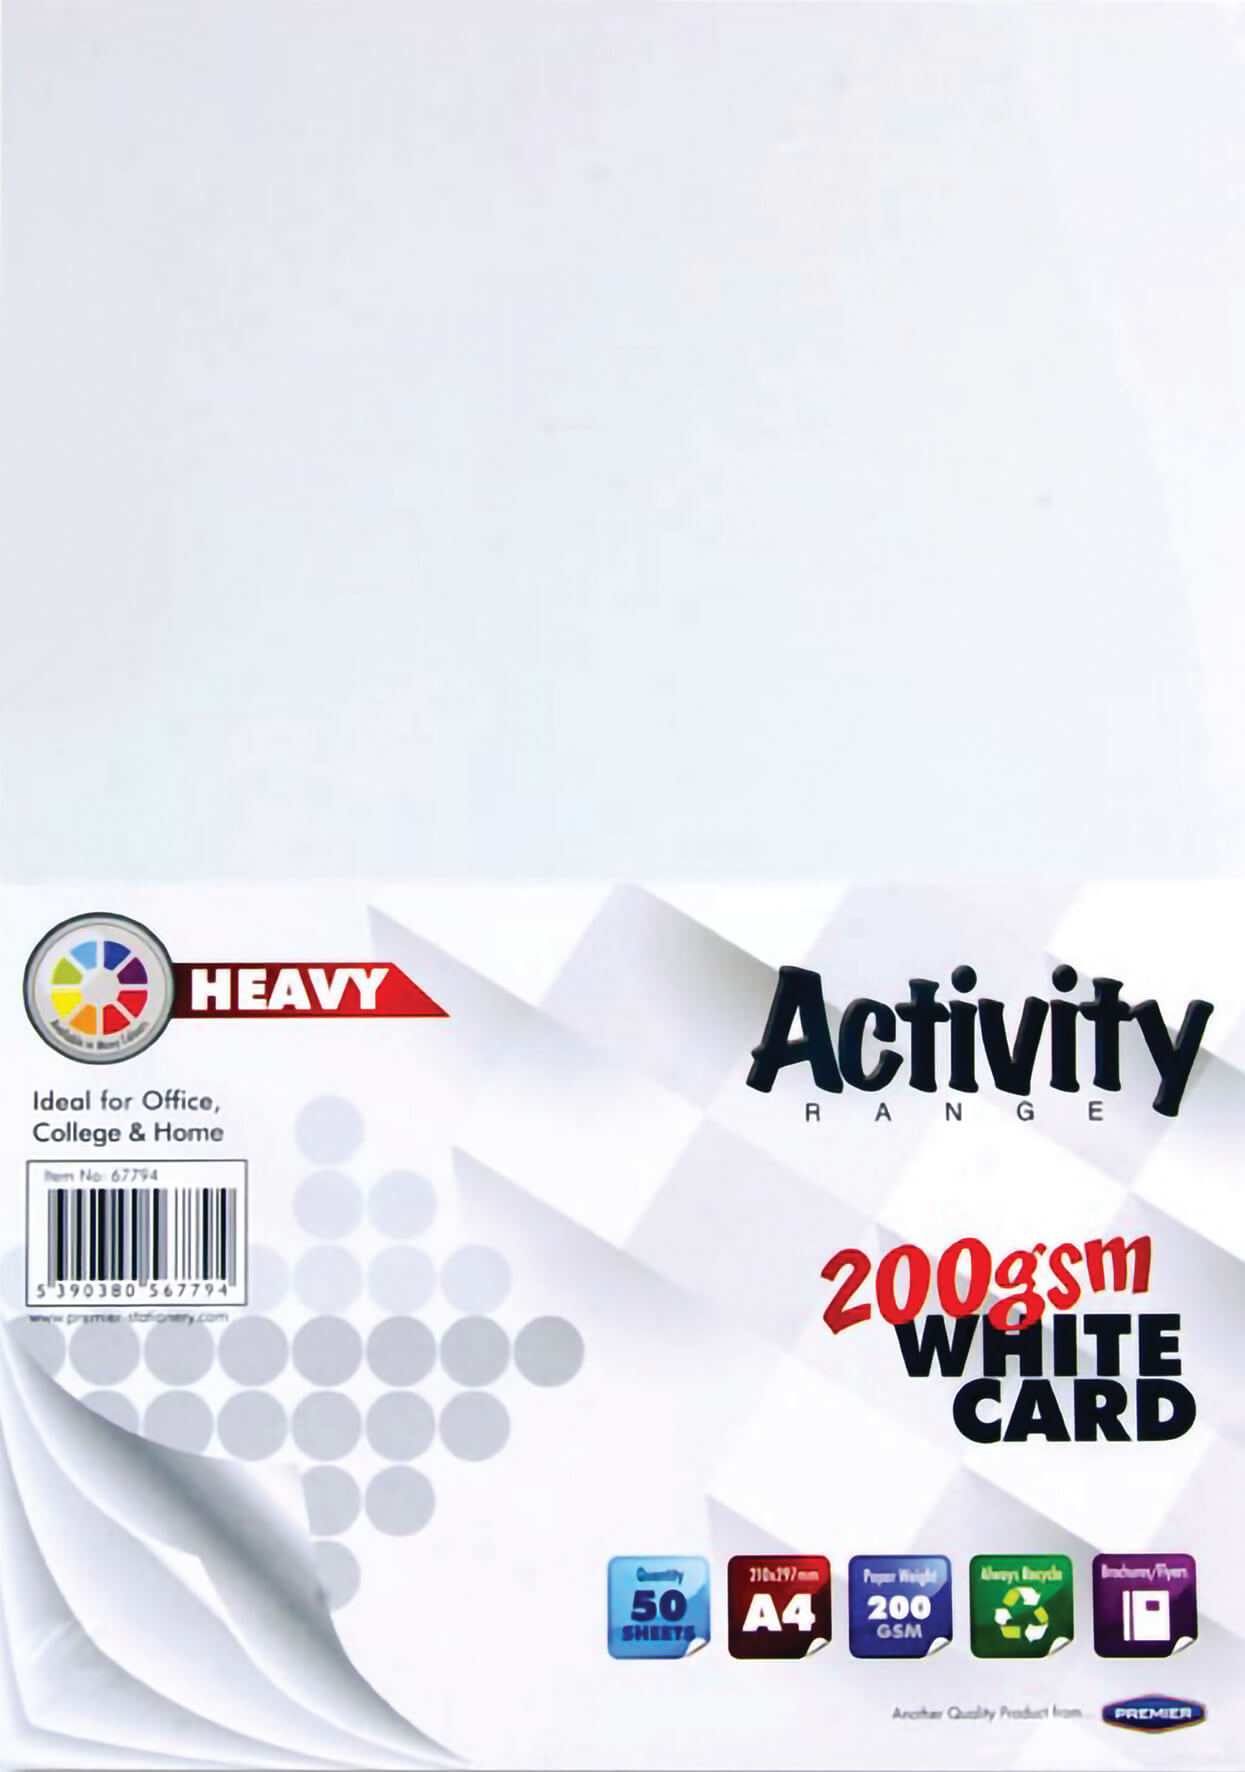 Heavy Card White A4 200gsm - 50 sheets